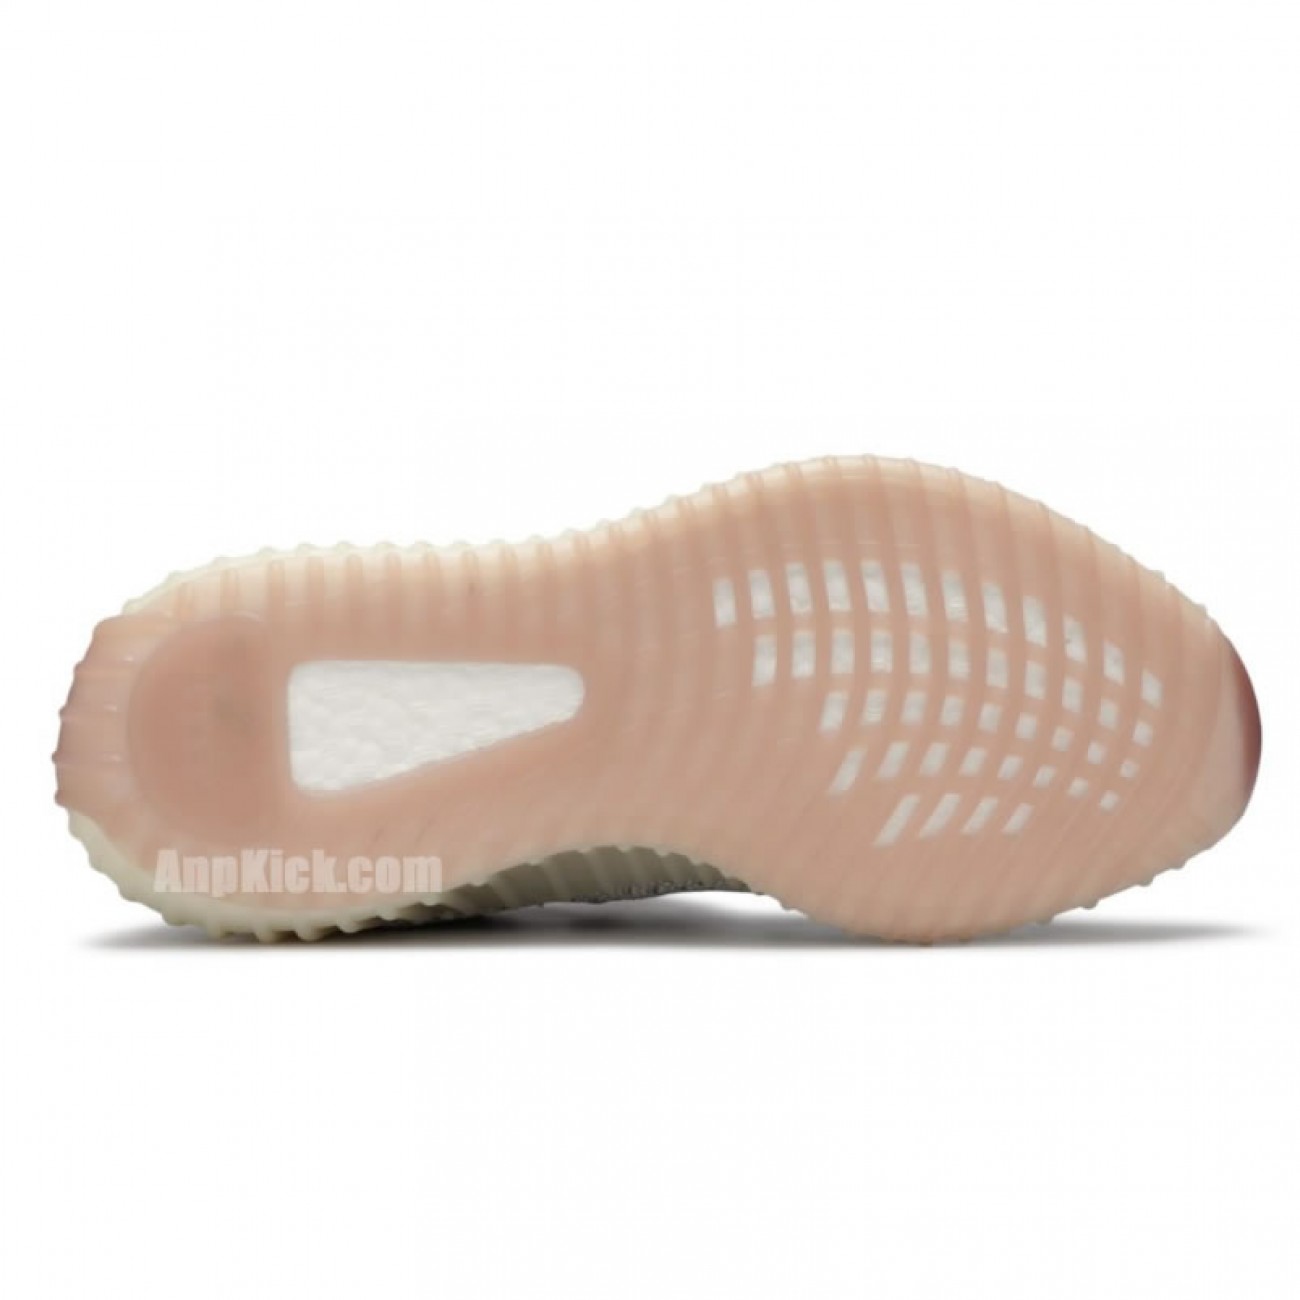 adidas Yeezy Boost 350 V2 "Citrin Non-Reflective" Release Date FW3042